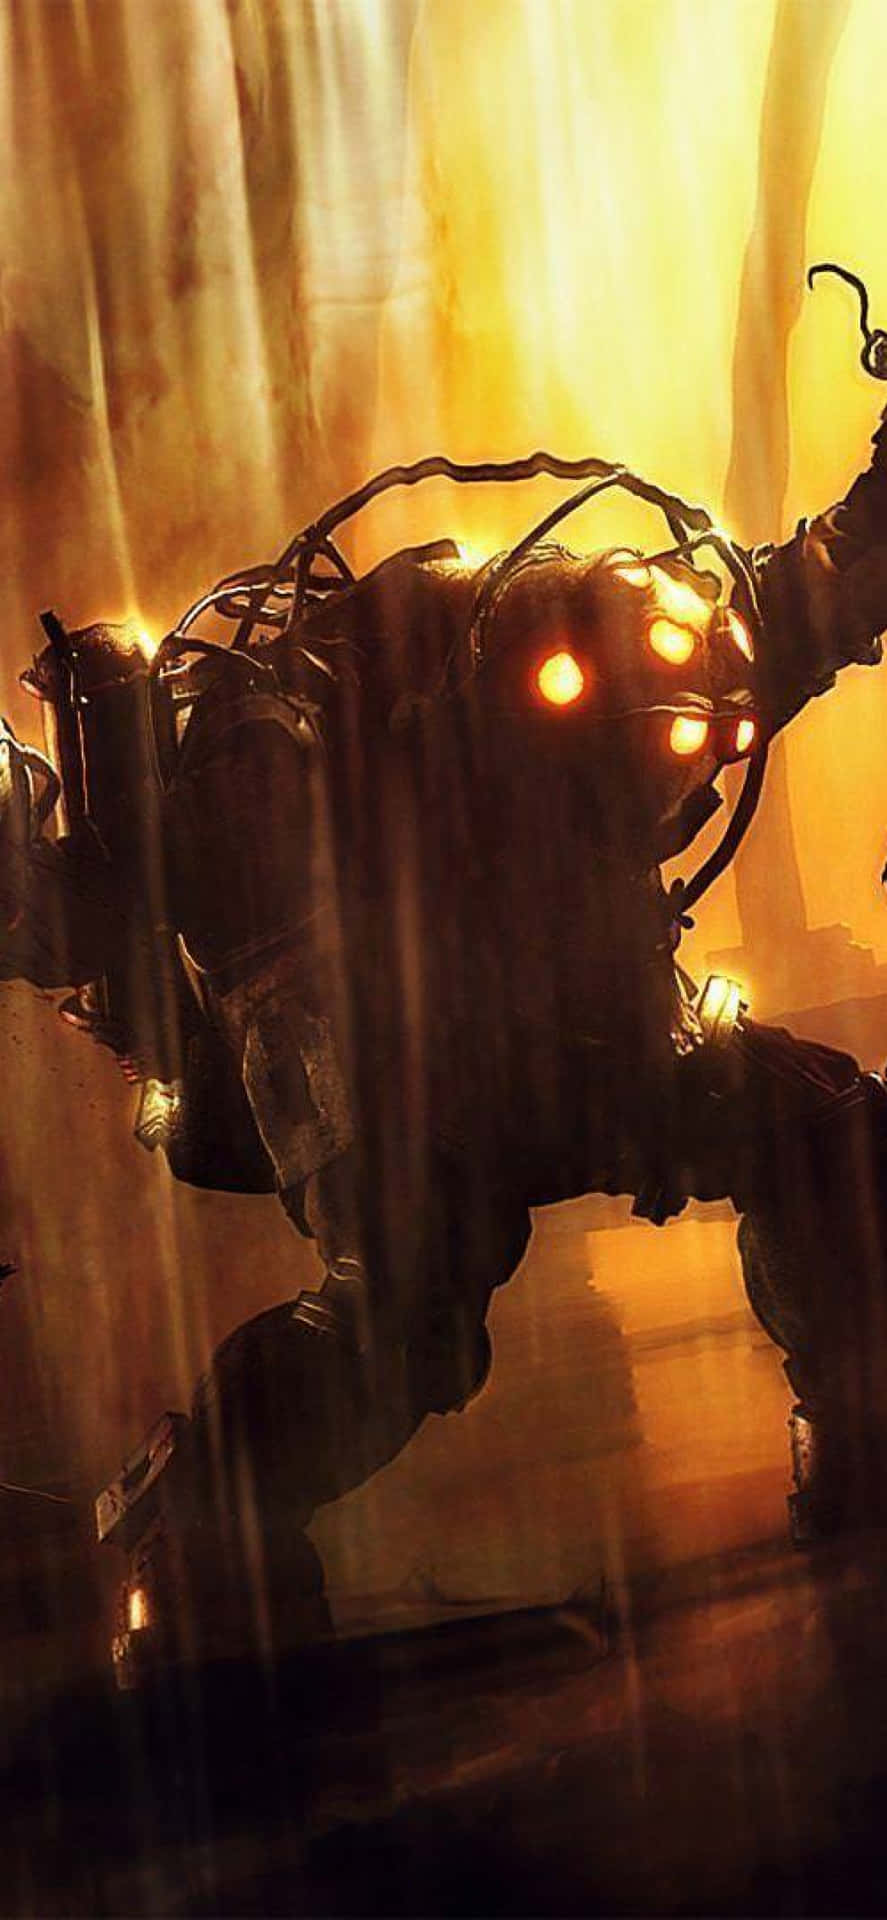 Play Bioshock on your 4K iPhone today! Wallpaper